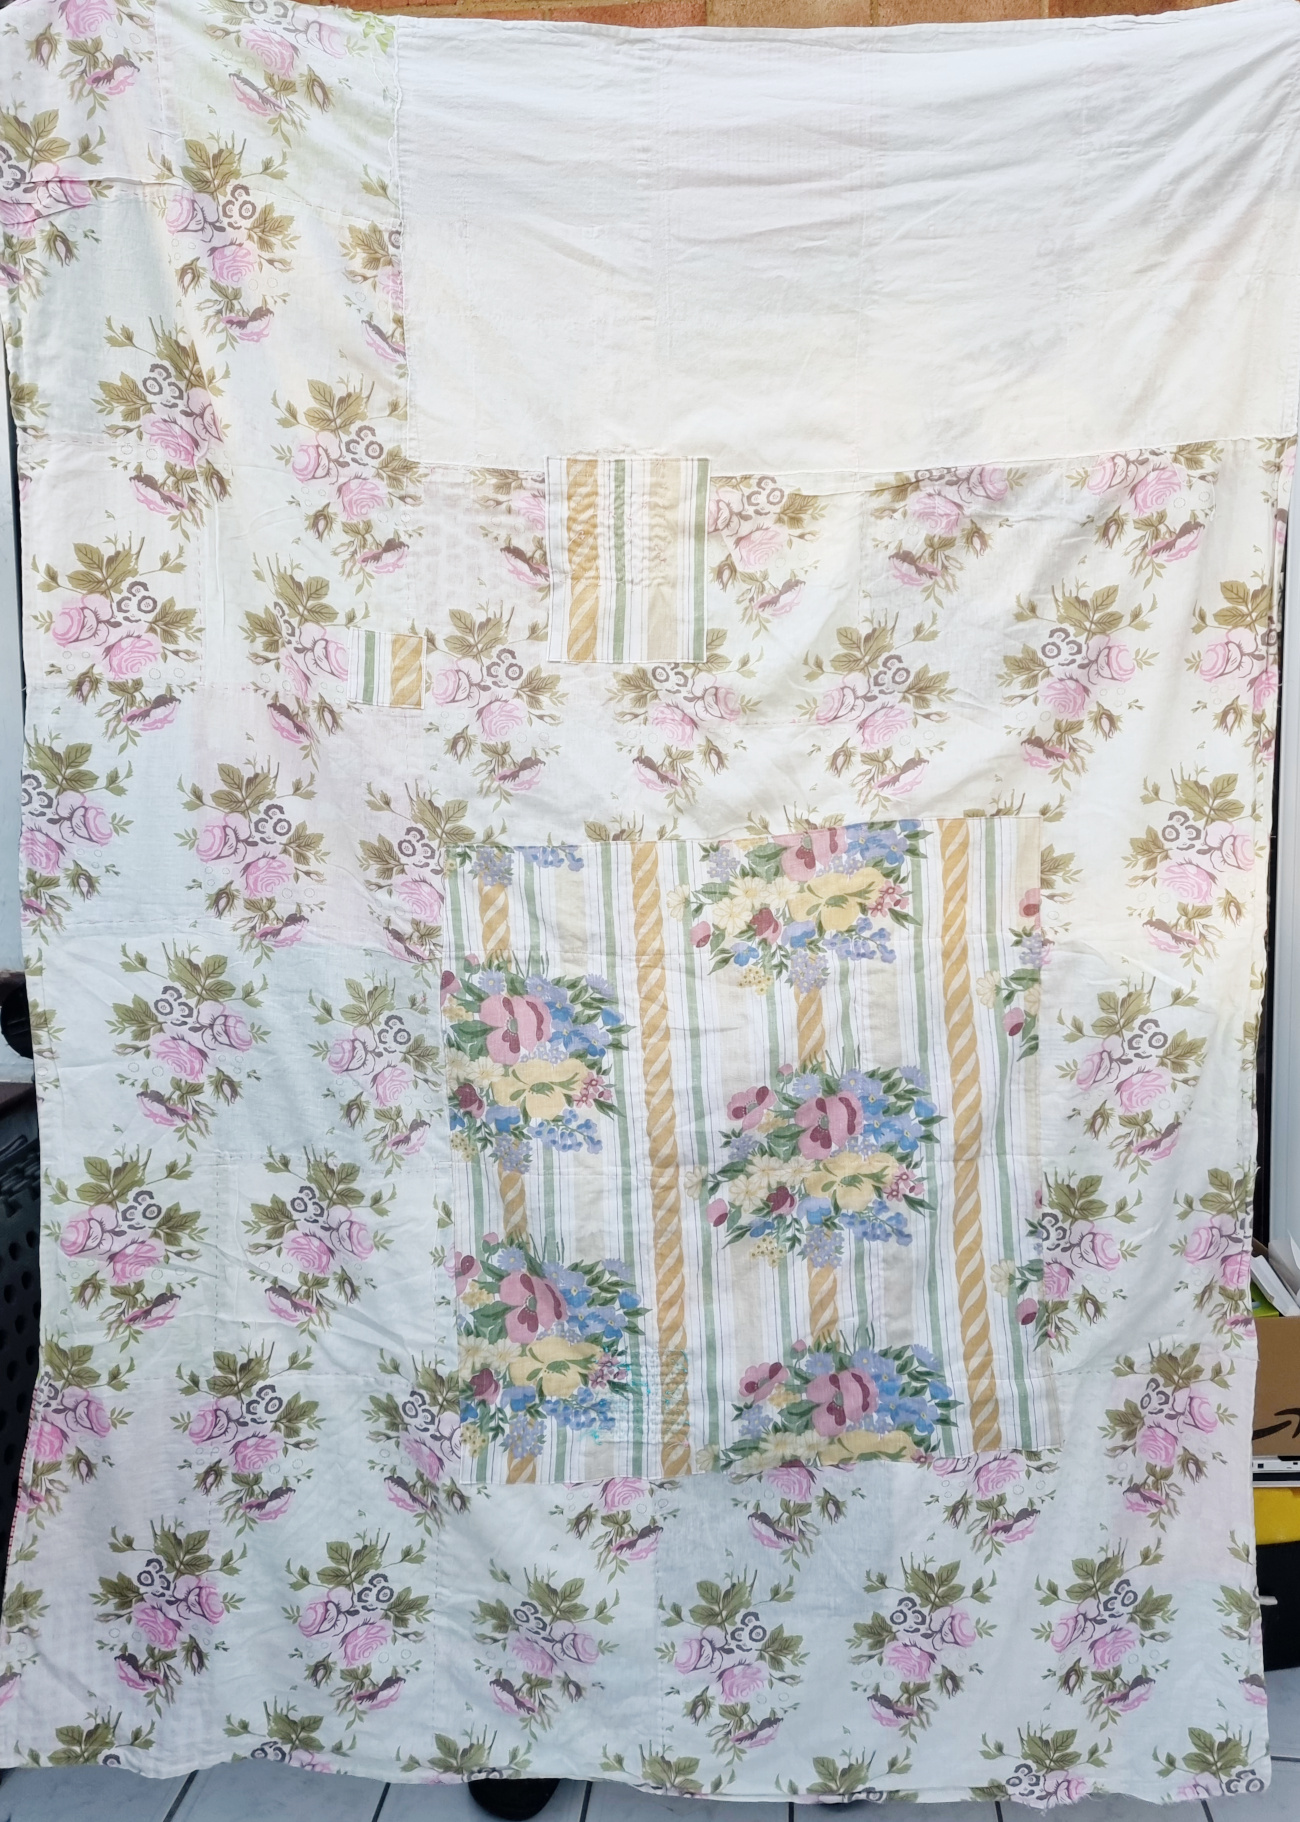 Full view of the back of a blanket, made from a floral duvet cover. There are several large patches on the fabric.